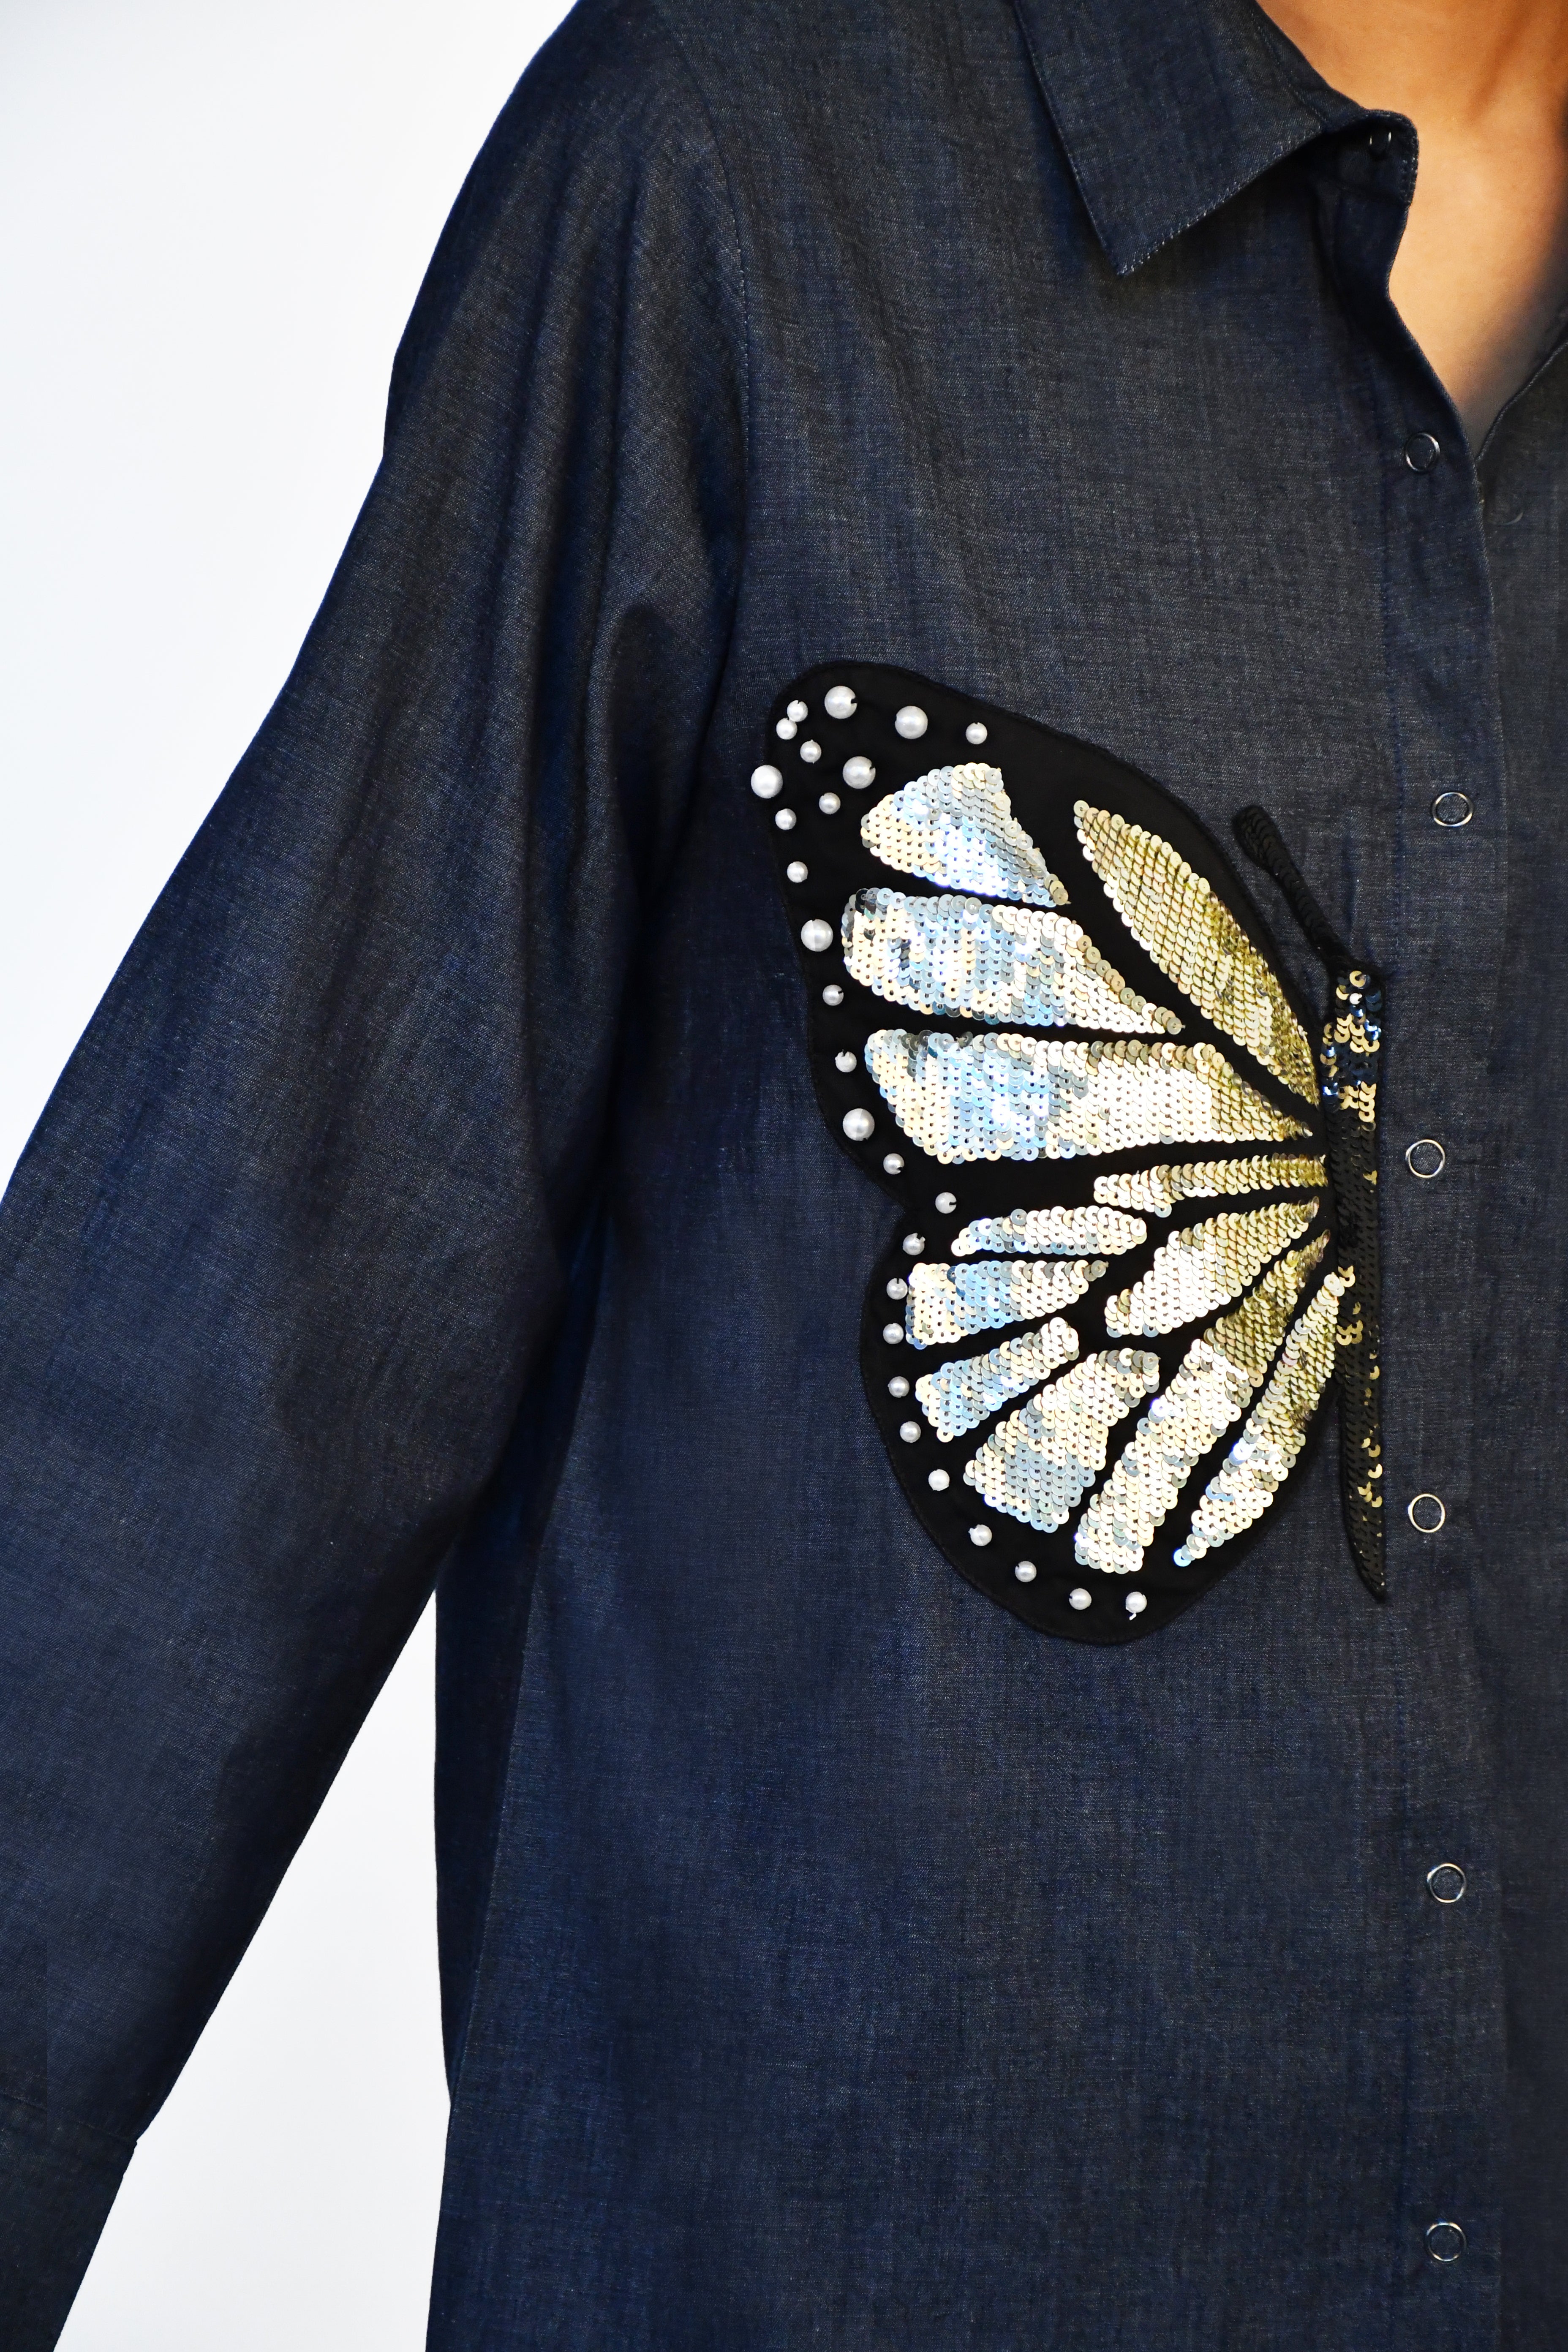 DENIM SHIRT WITH LIGHT GOLD MULTIPLE BUTTERFLY EMBROIDERY